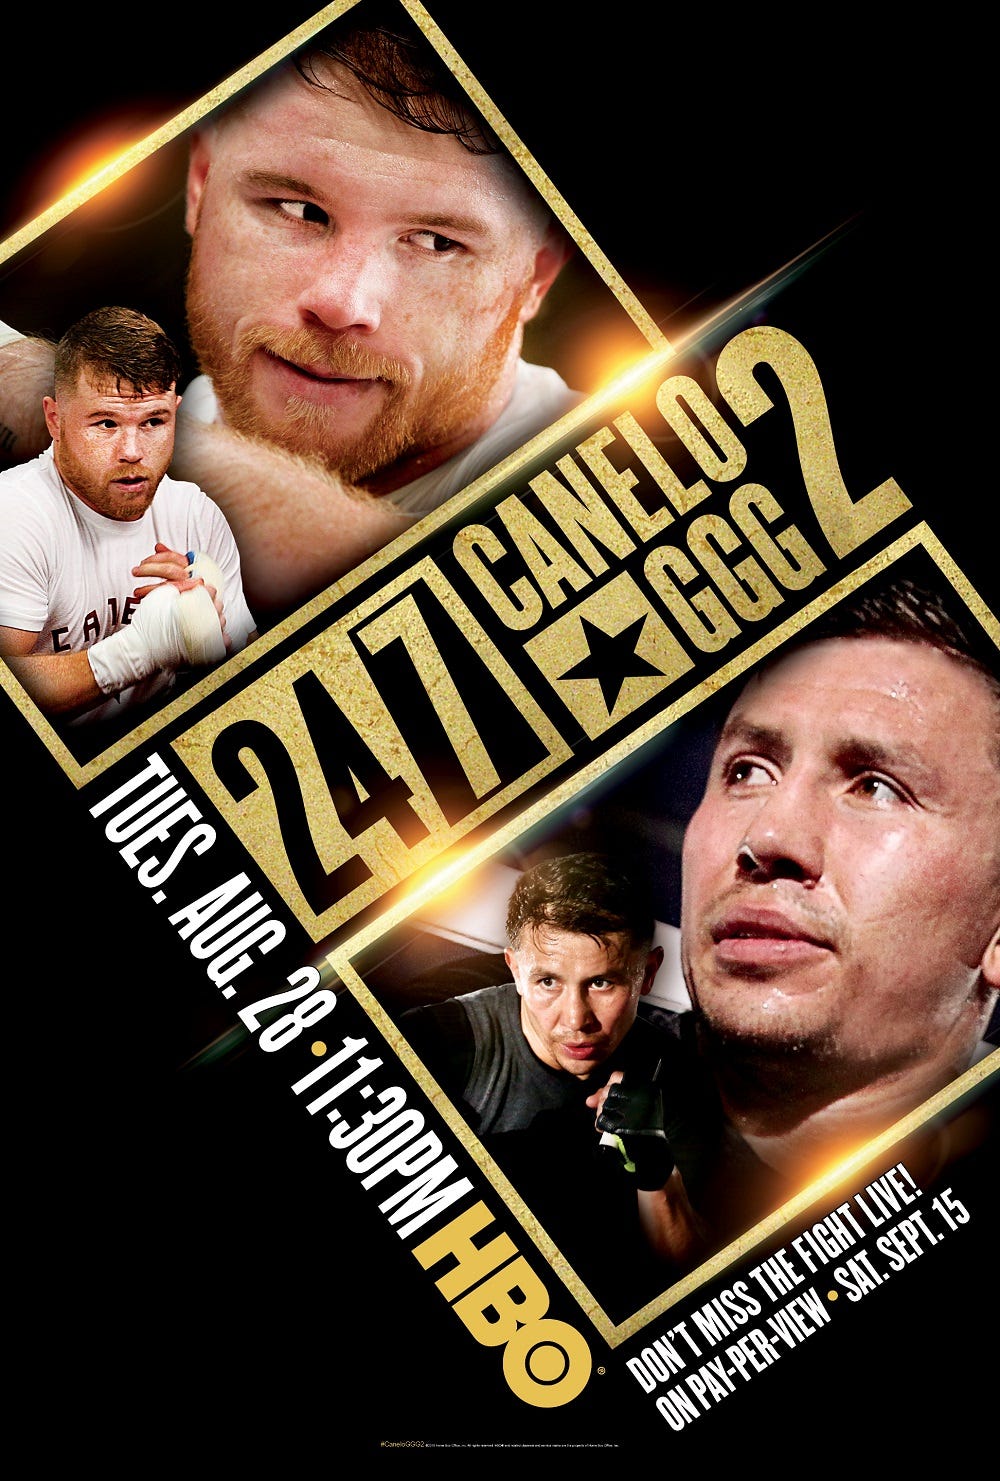 HBO SPORTS® 24/7 CANELO/GGG 2, A BEHIND-THE-SCENES LOOK LEADING UP TO THE BLOCKBUSTER PAY-PER-VIEW MEGA-FIGHT IN LAS VEGAS, DEBUTS TUESDAY, AUGUST 28 ON HBO by WarnerMedia Entertainment WarnerMedia Entertainment 